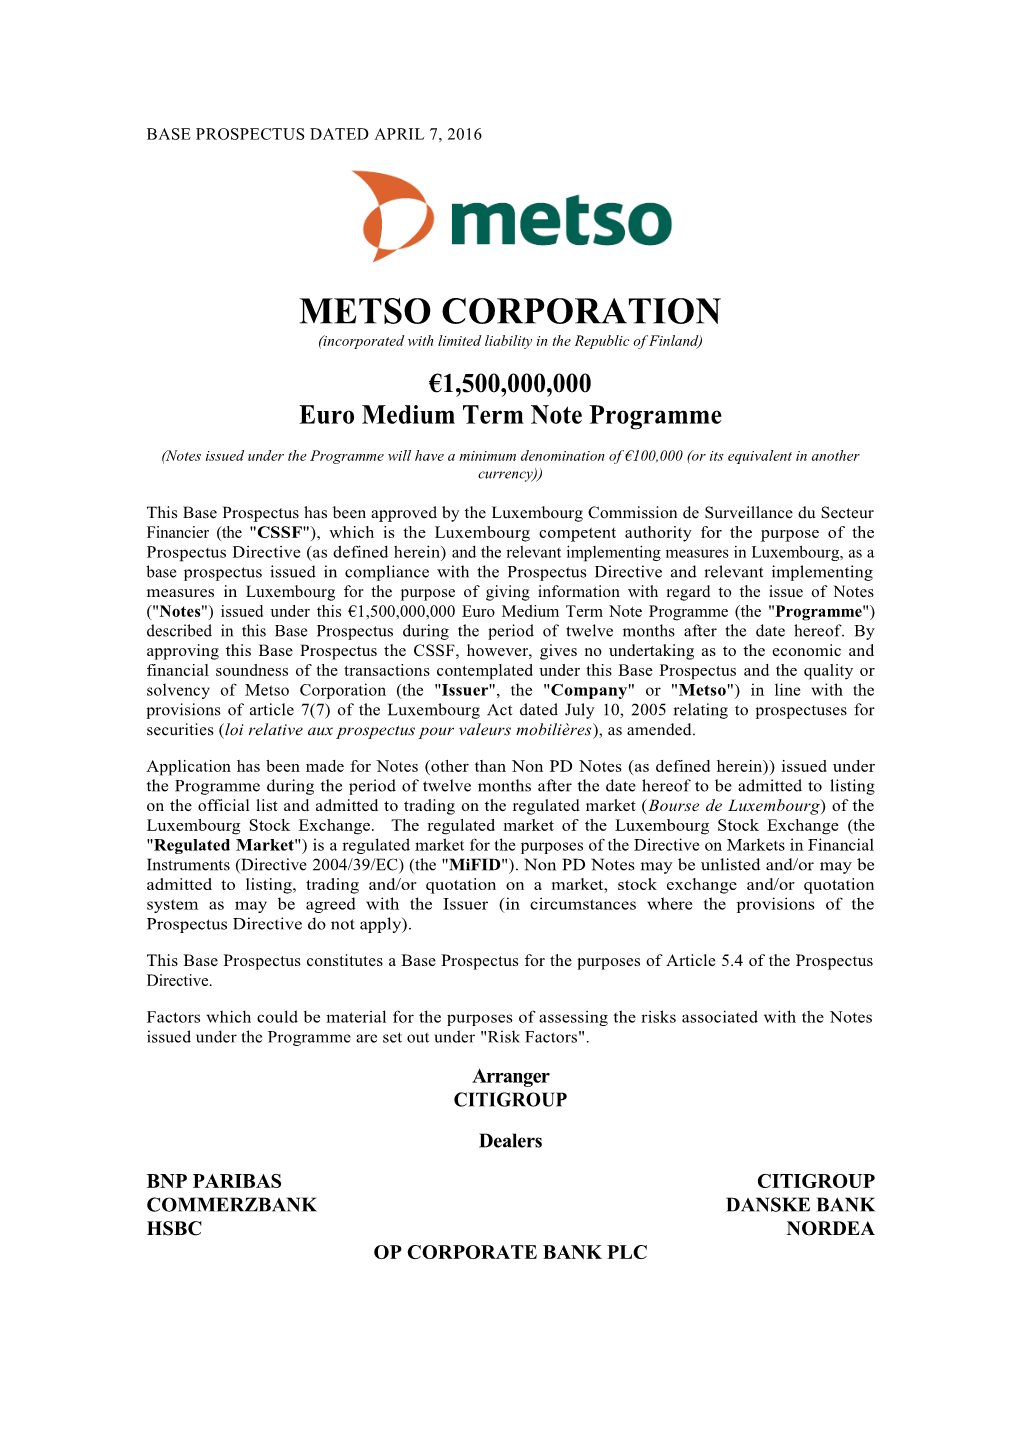 METSO CORPORATION (Incorporated with Limited Liability in the Republic of Finland) €1,500,000,000 Euro Medium Term Note Programme